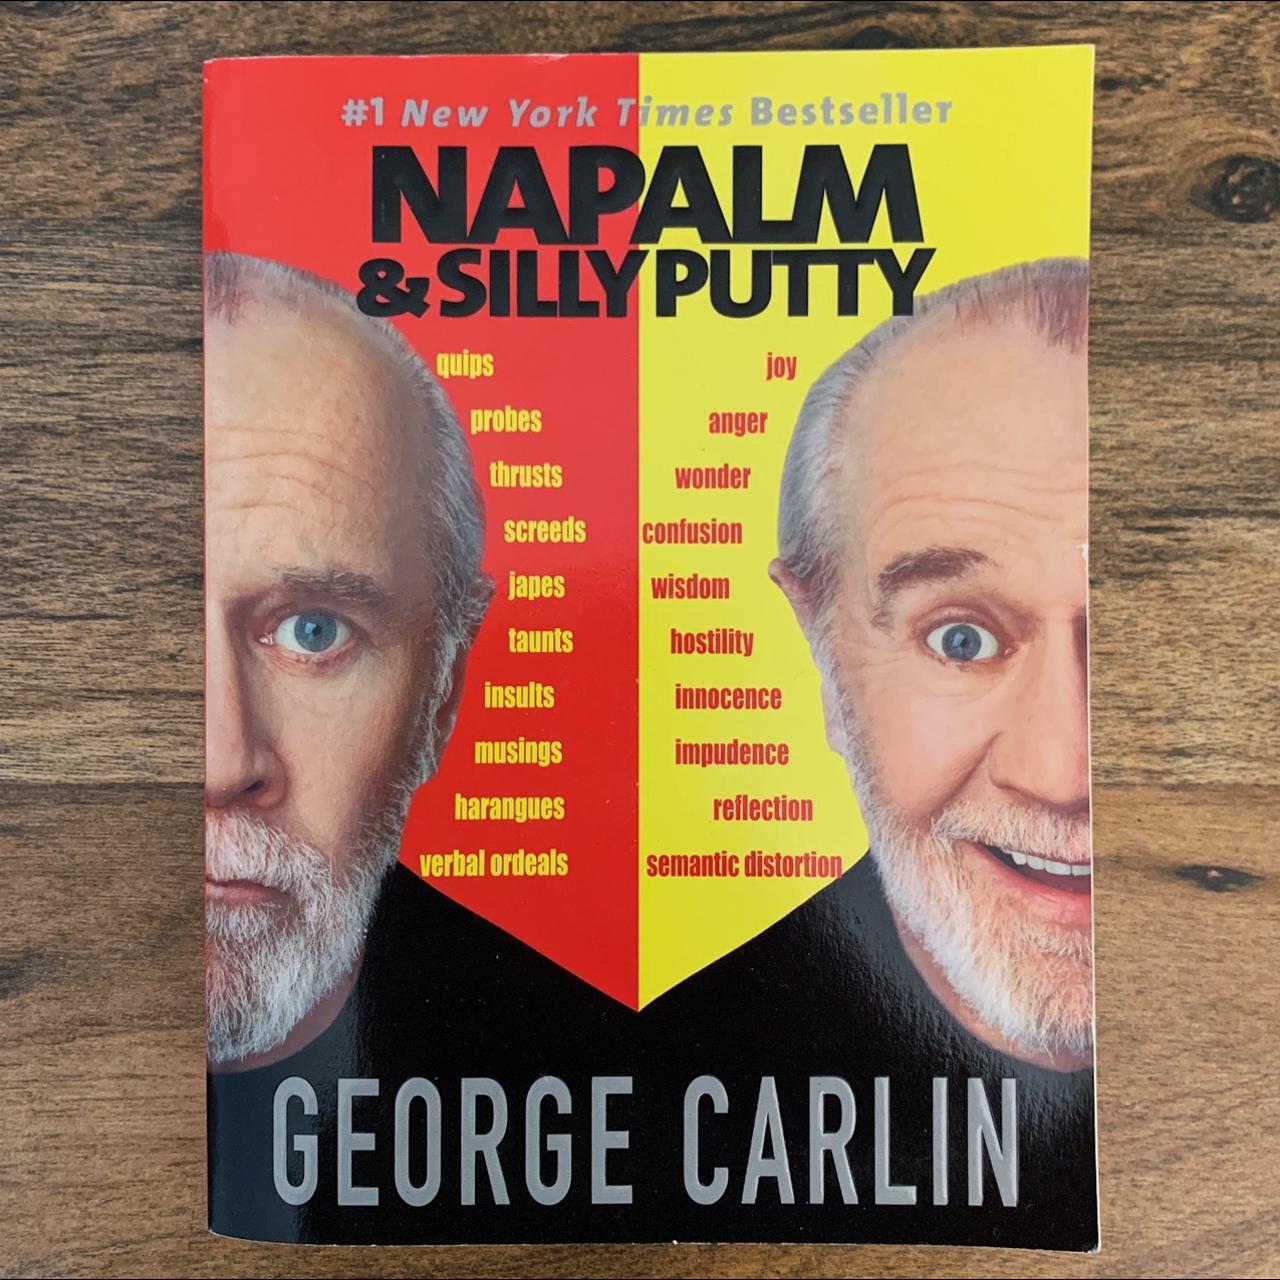 Product Image 1 - *FREE SHIPPING*

George Carlin - Napalm